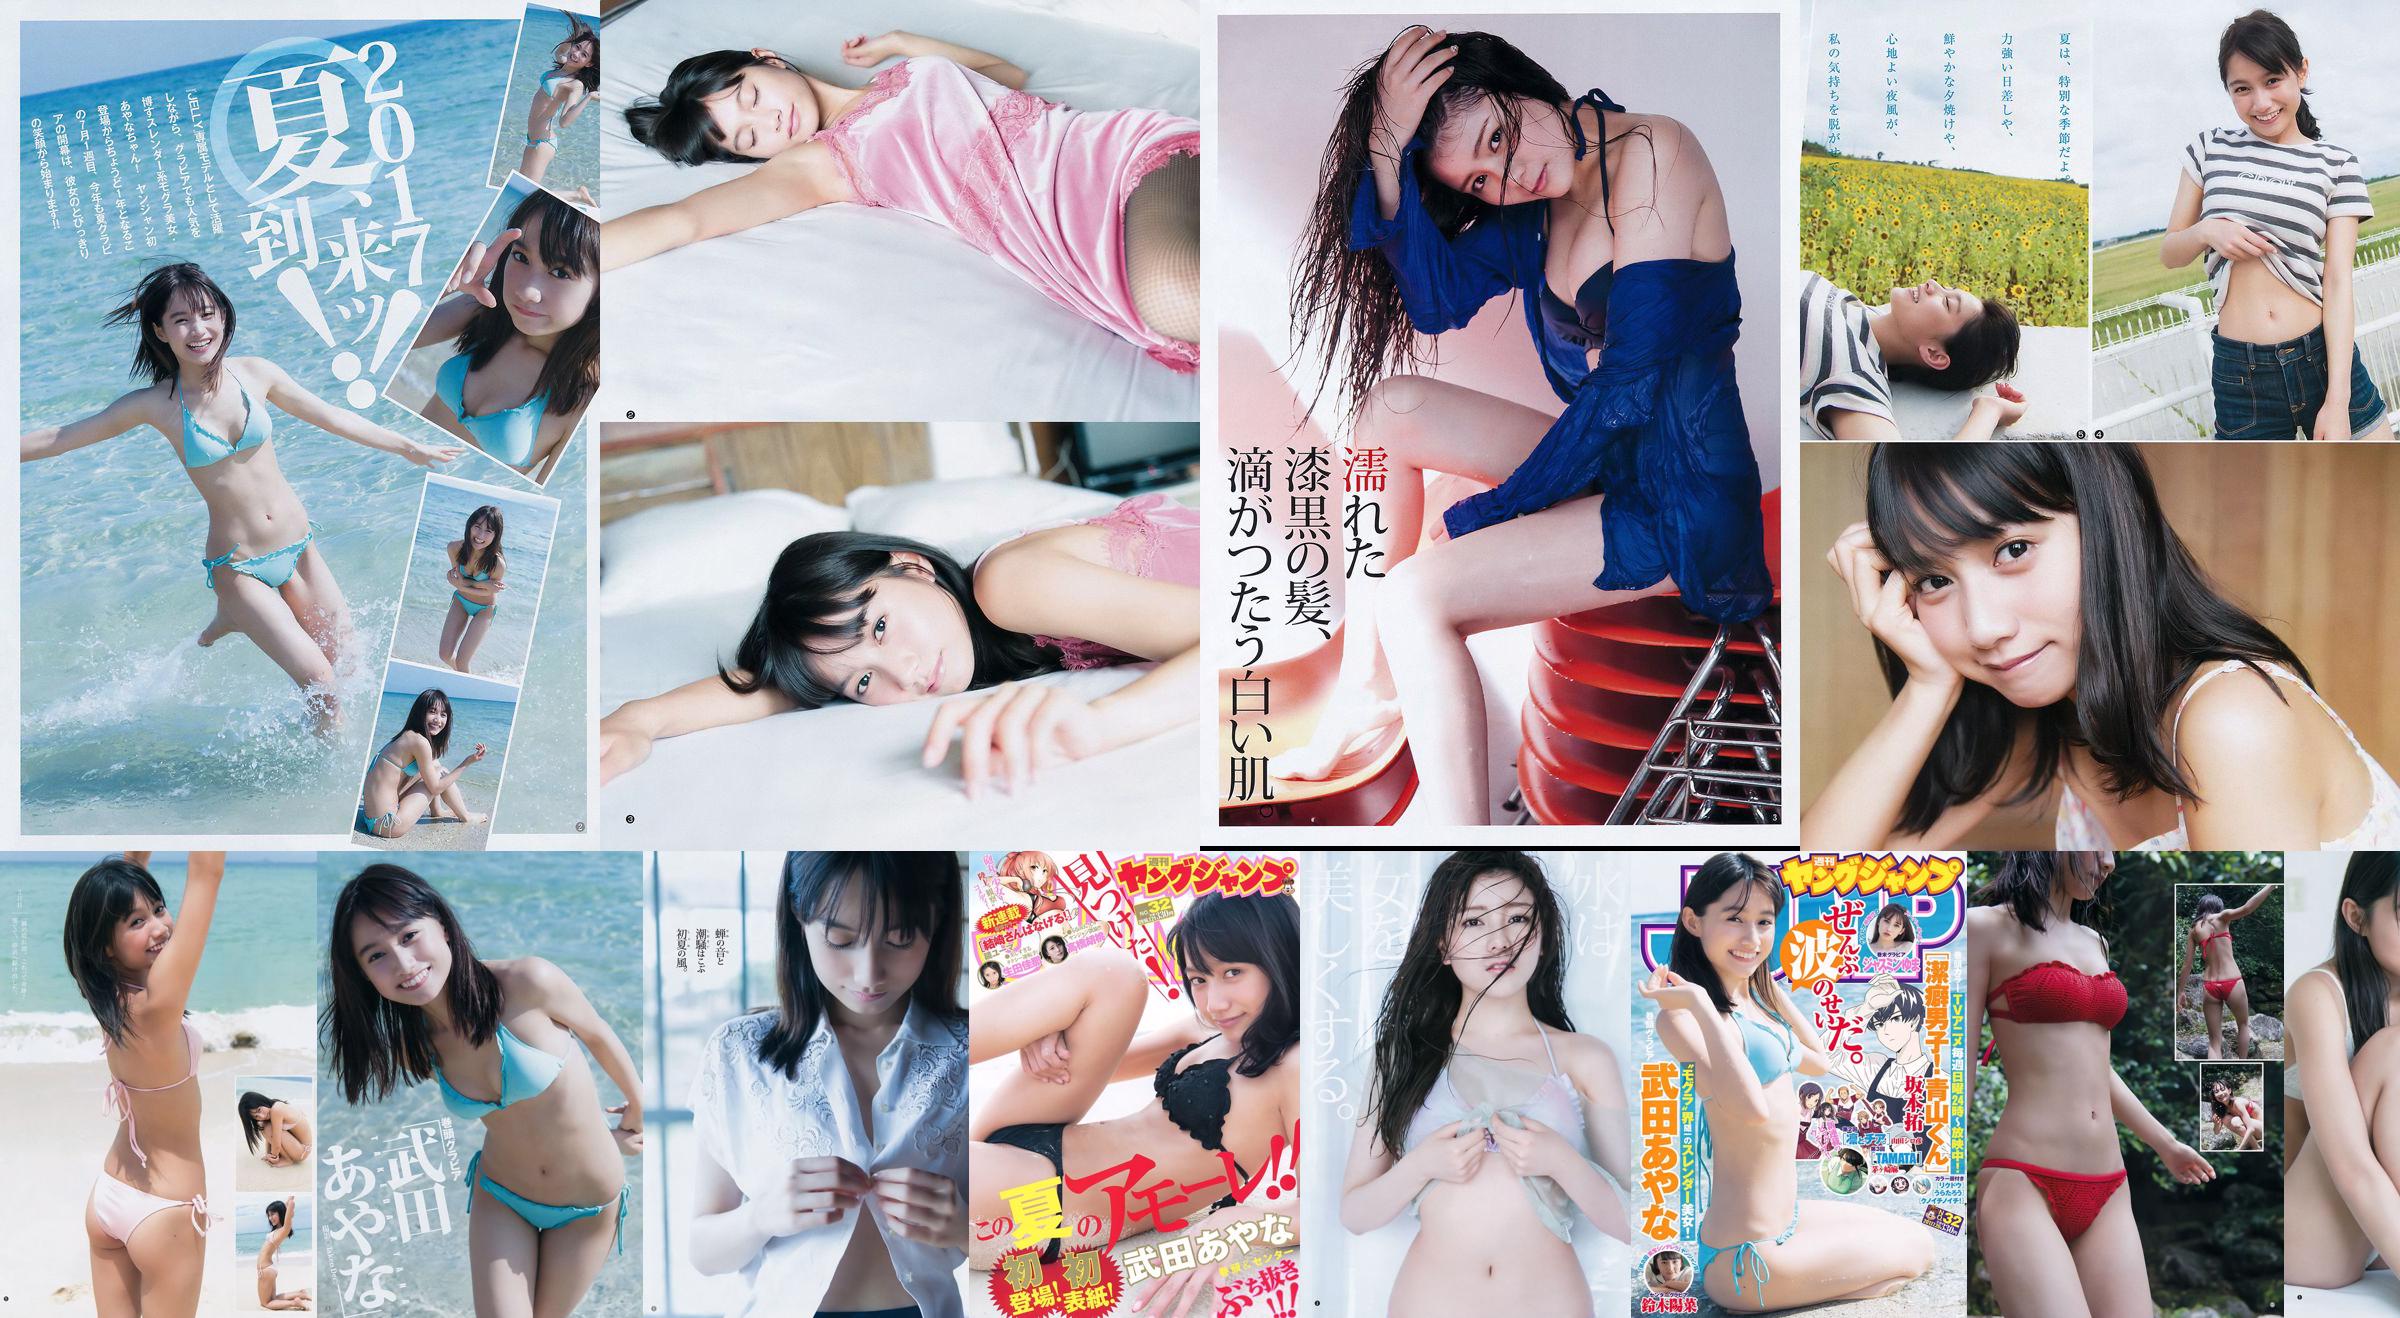 [FRIDAY] Akari Suda << The idol who has crossed the line and is in second place in the general election is in a handbra & T-back >> Photo No.3d8769 Page 1